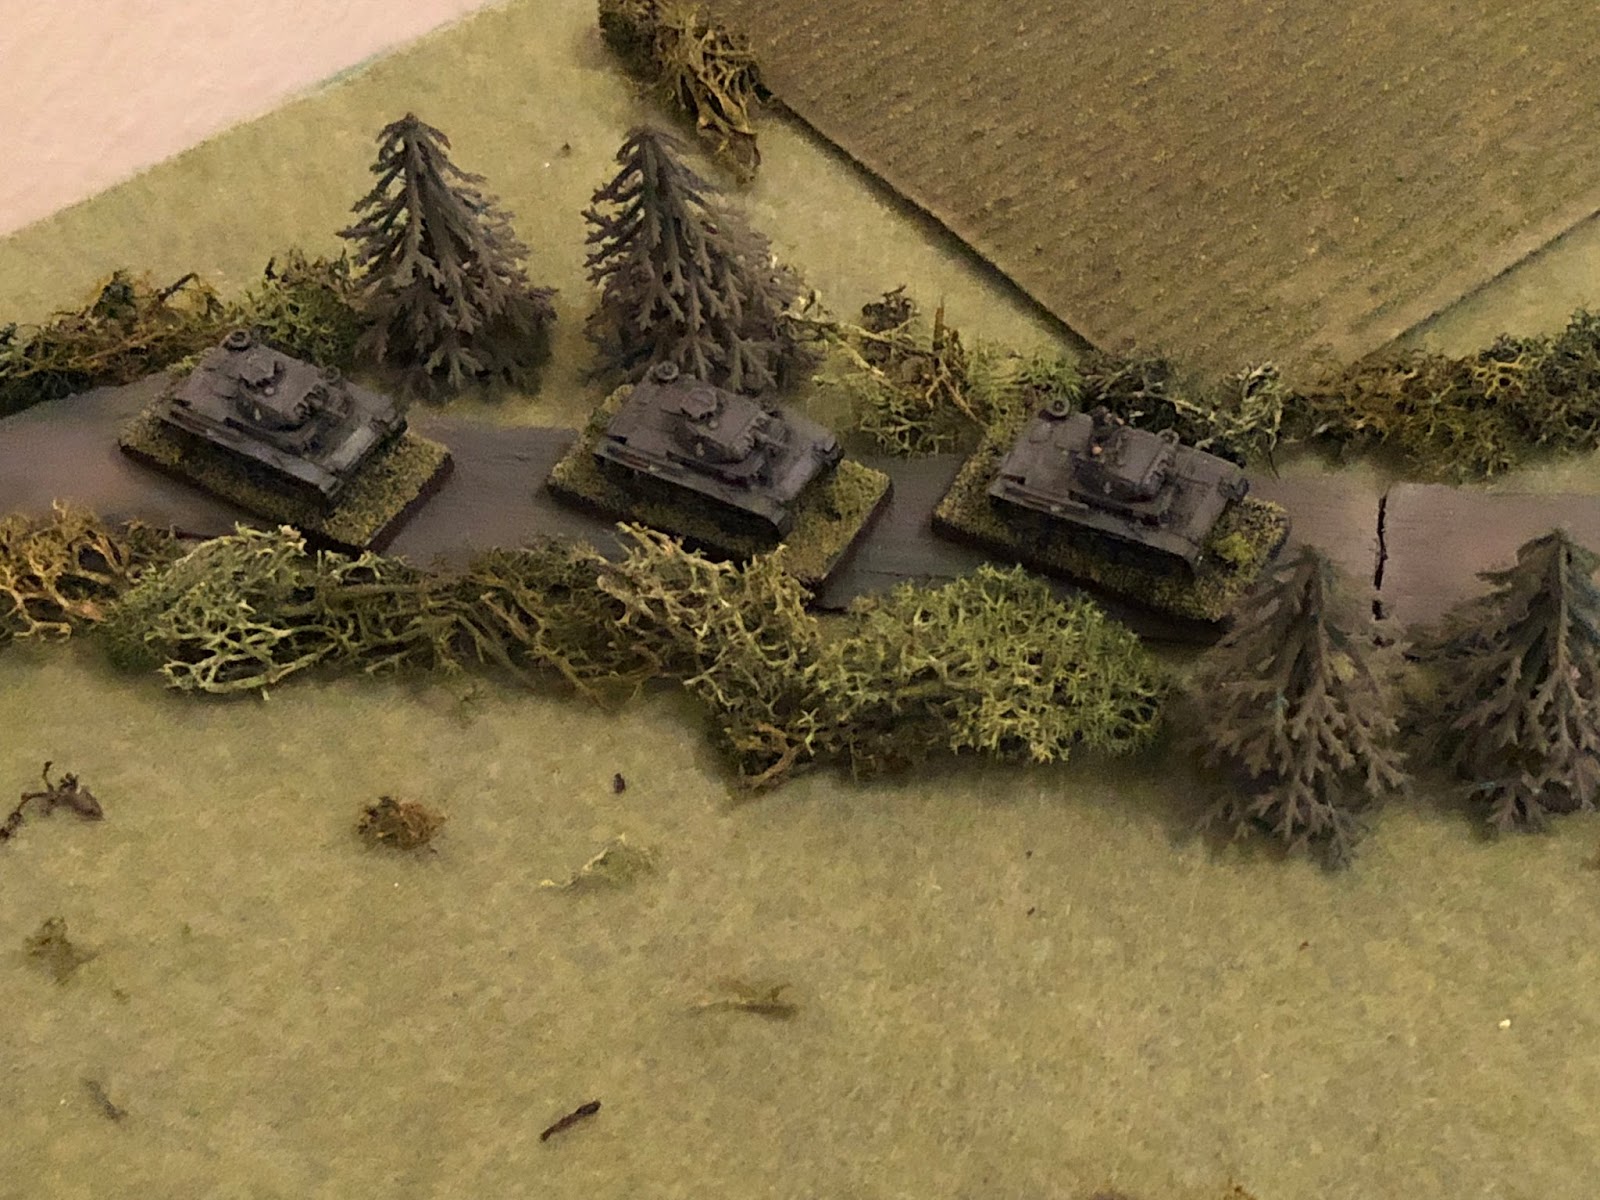  Where it's able to pick out Lt Loeb's platoon of Panzer Mk IIIs moving up 